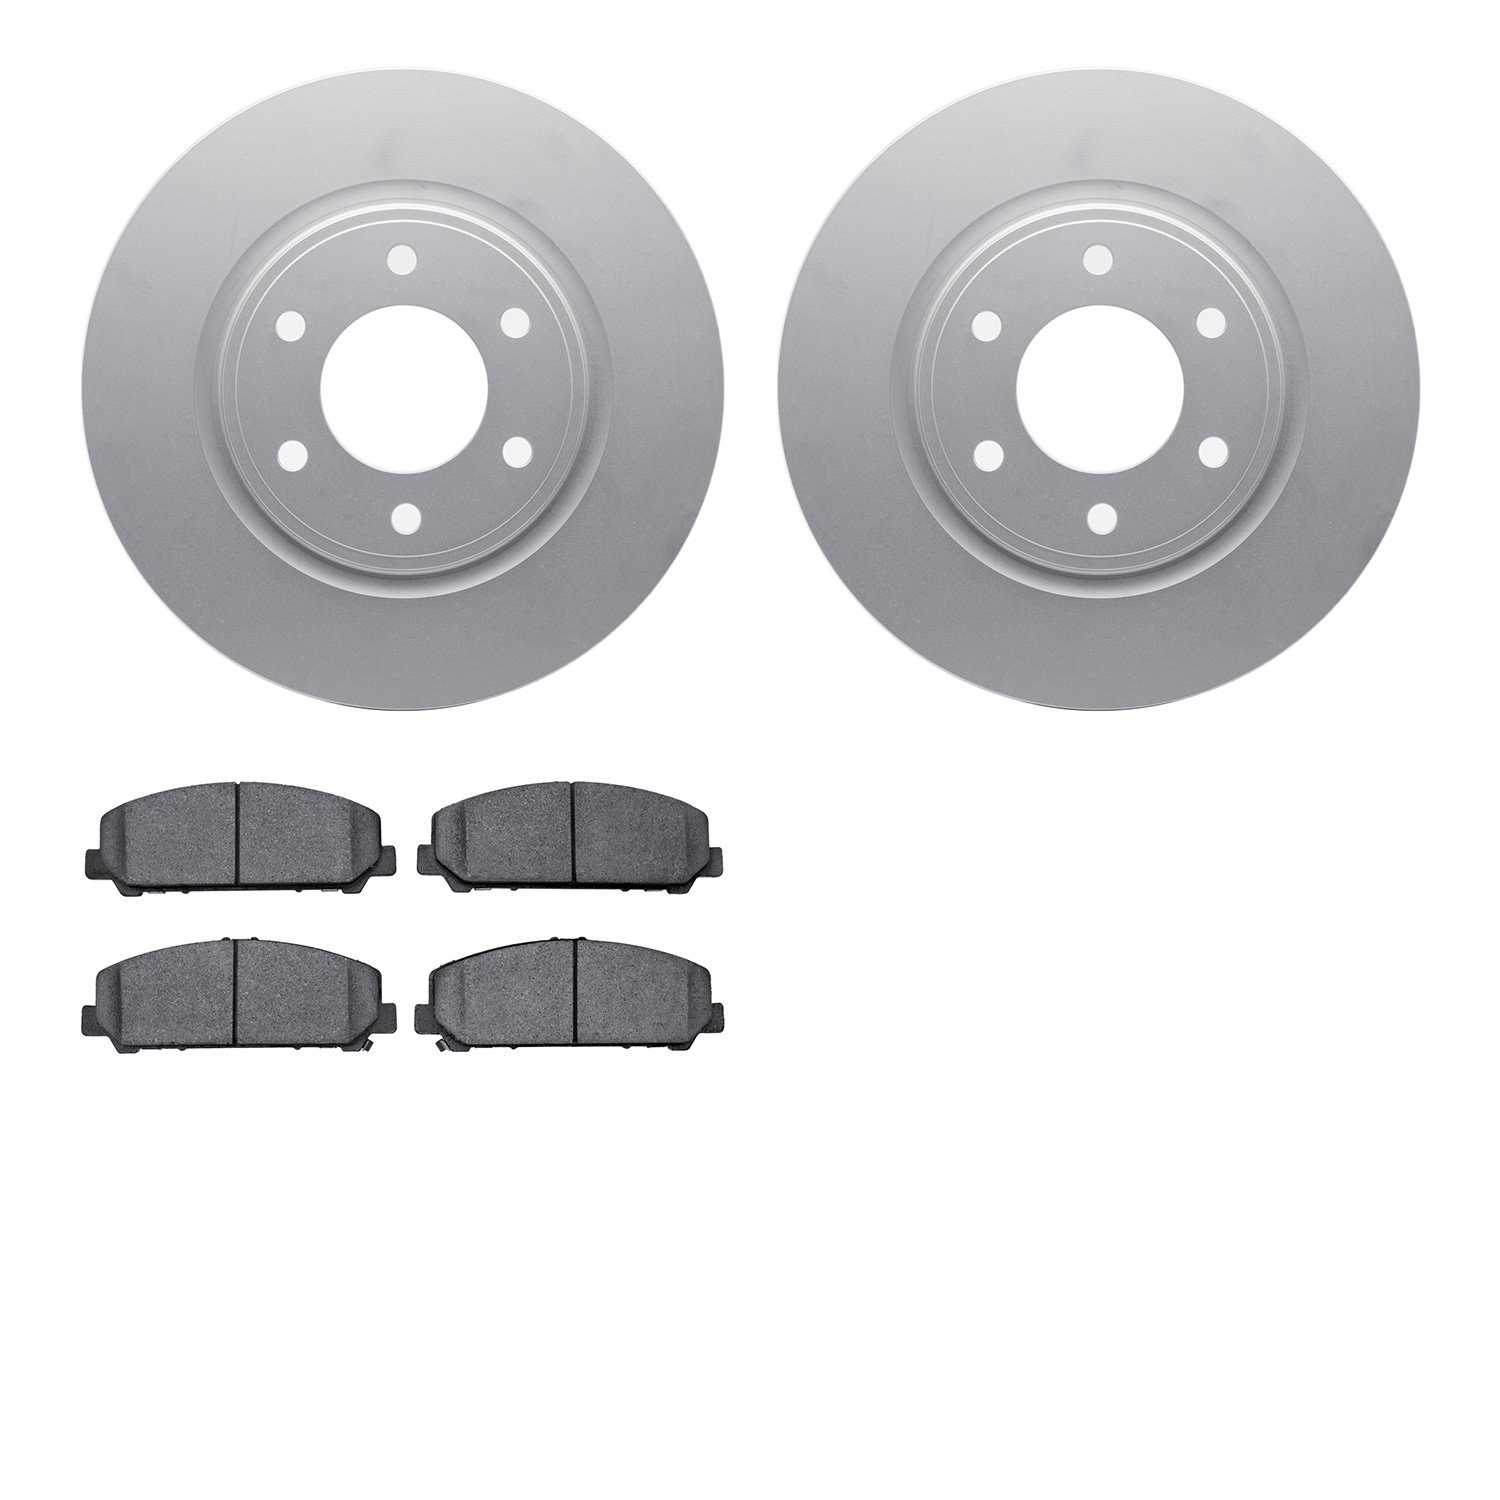 4402-68001 Geospec Brake Rotors with Ultimate-Duty Brake Pads Kit, Fits Select Infiniti/Nissan, Position: Front